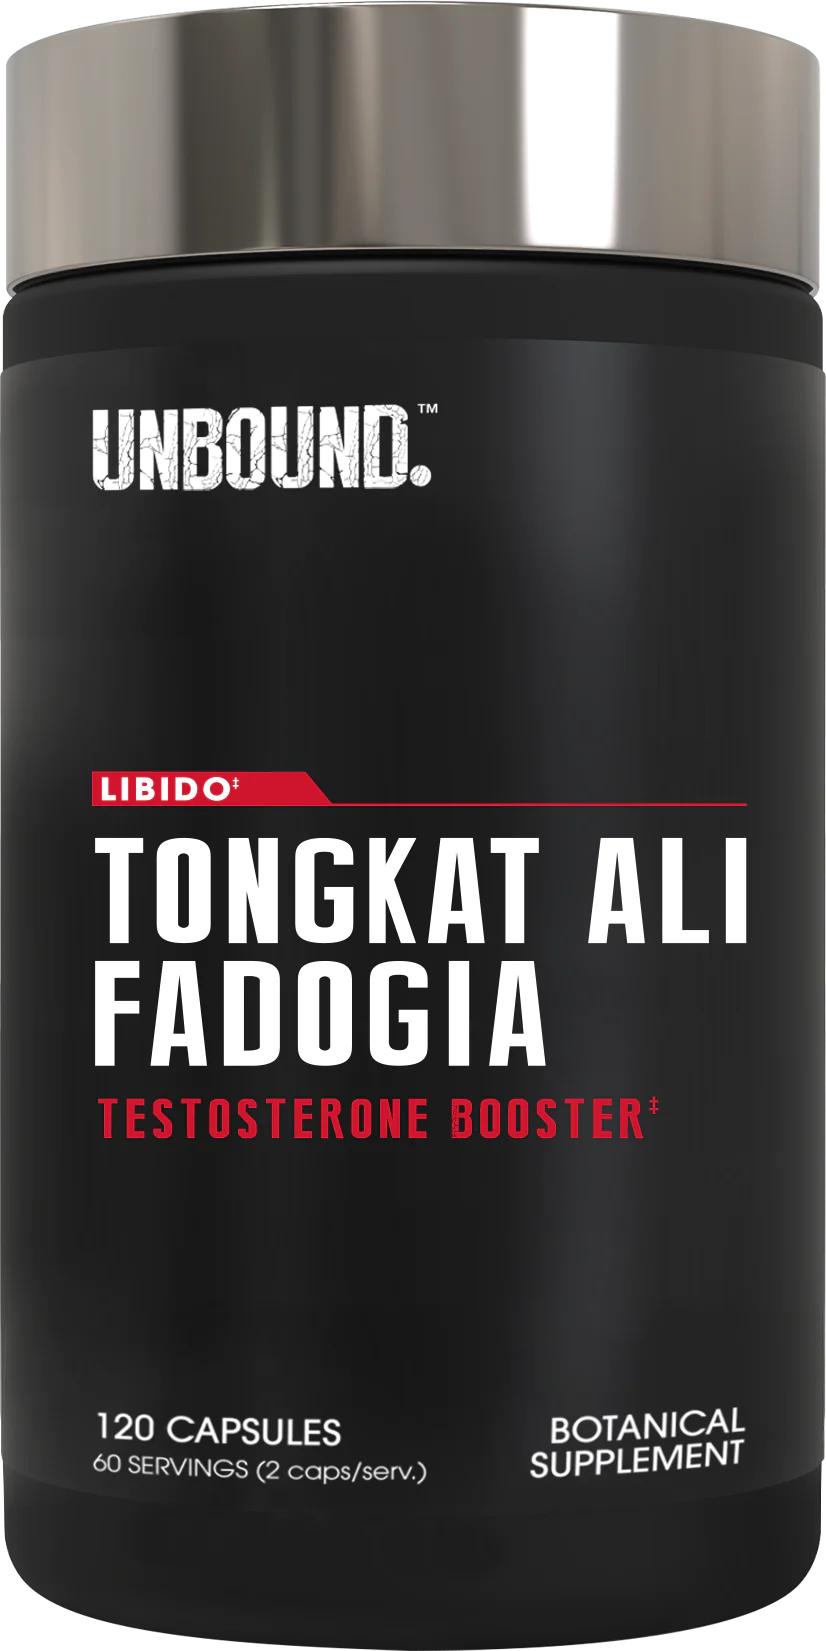 Unbound Tongkat Ali Fadogia  Testosterone Booster